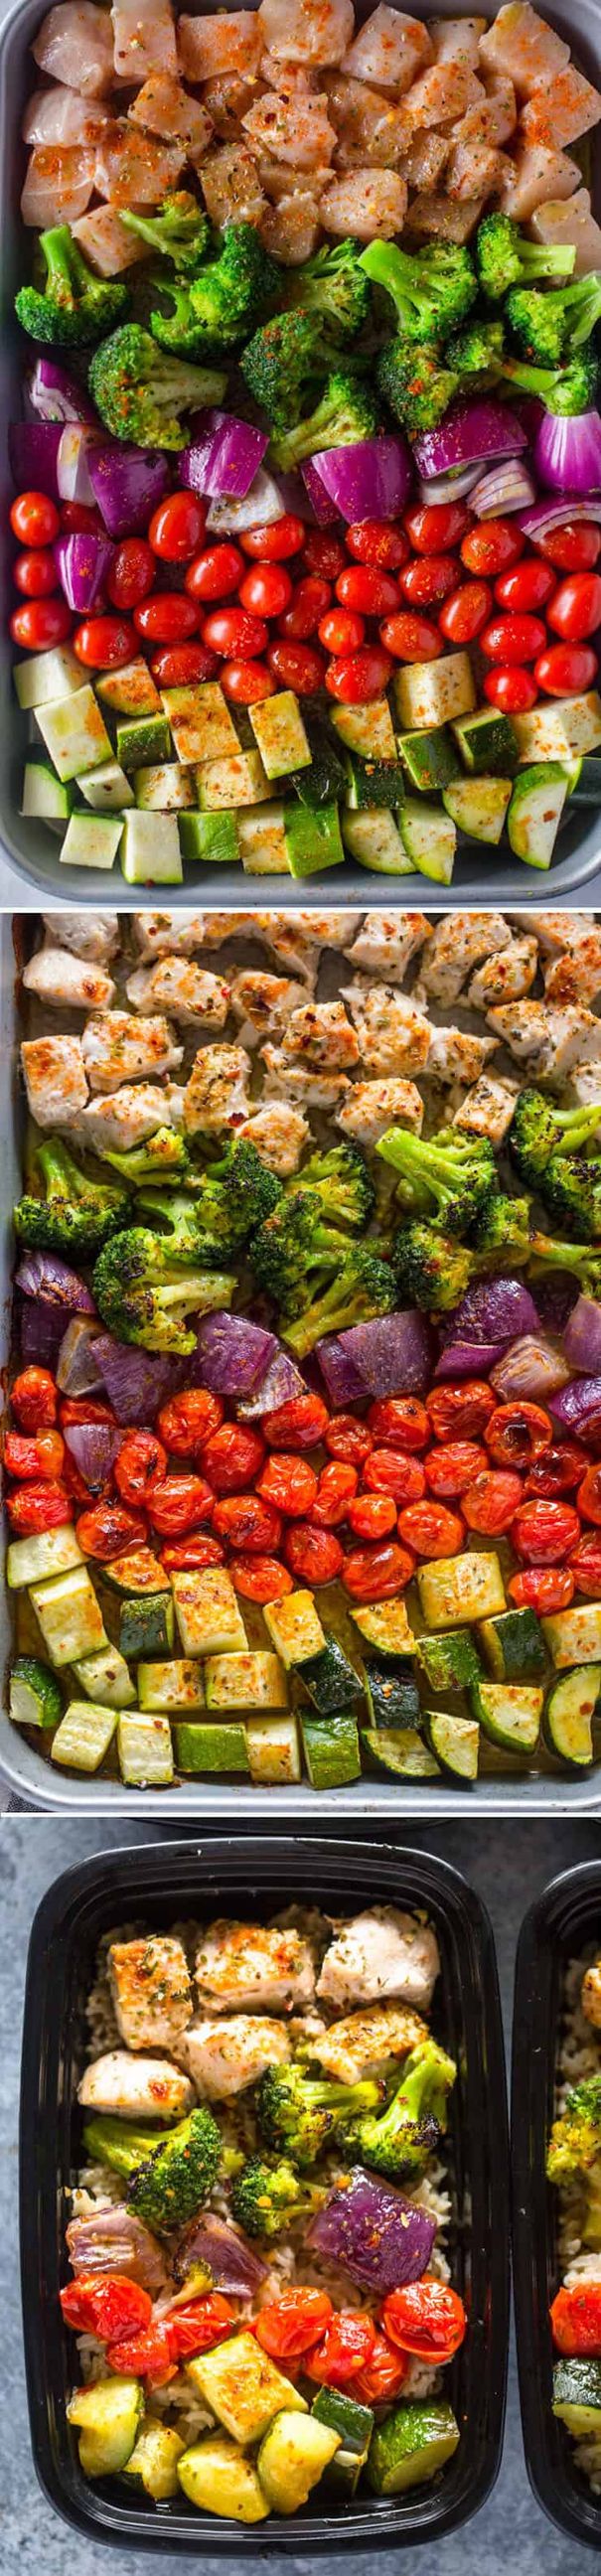 Healthy Roasted Chicken and Veggies